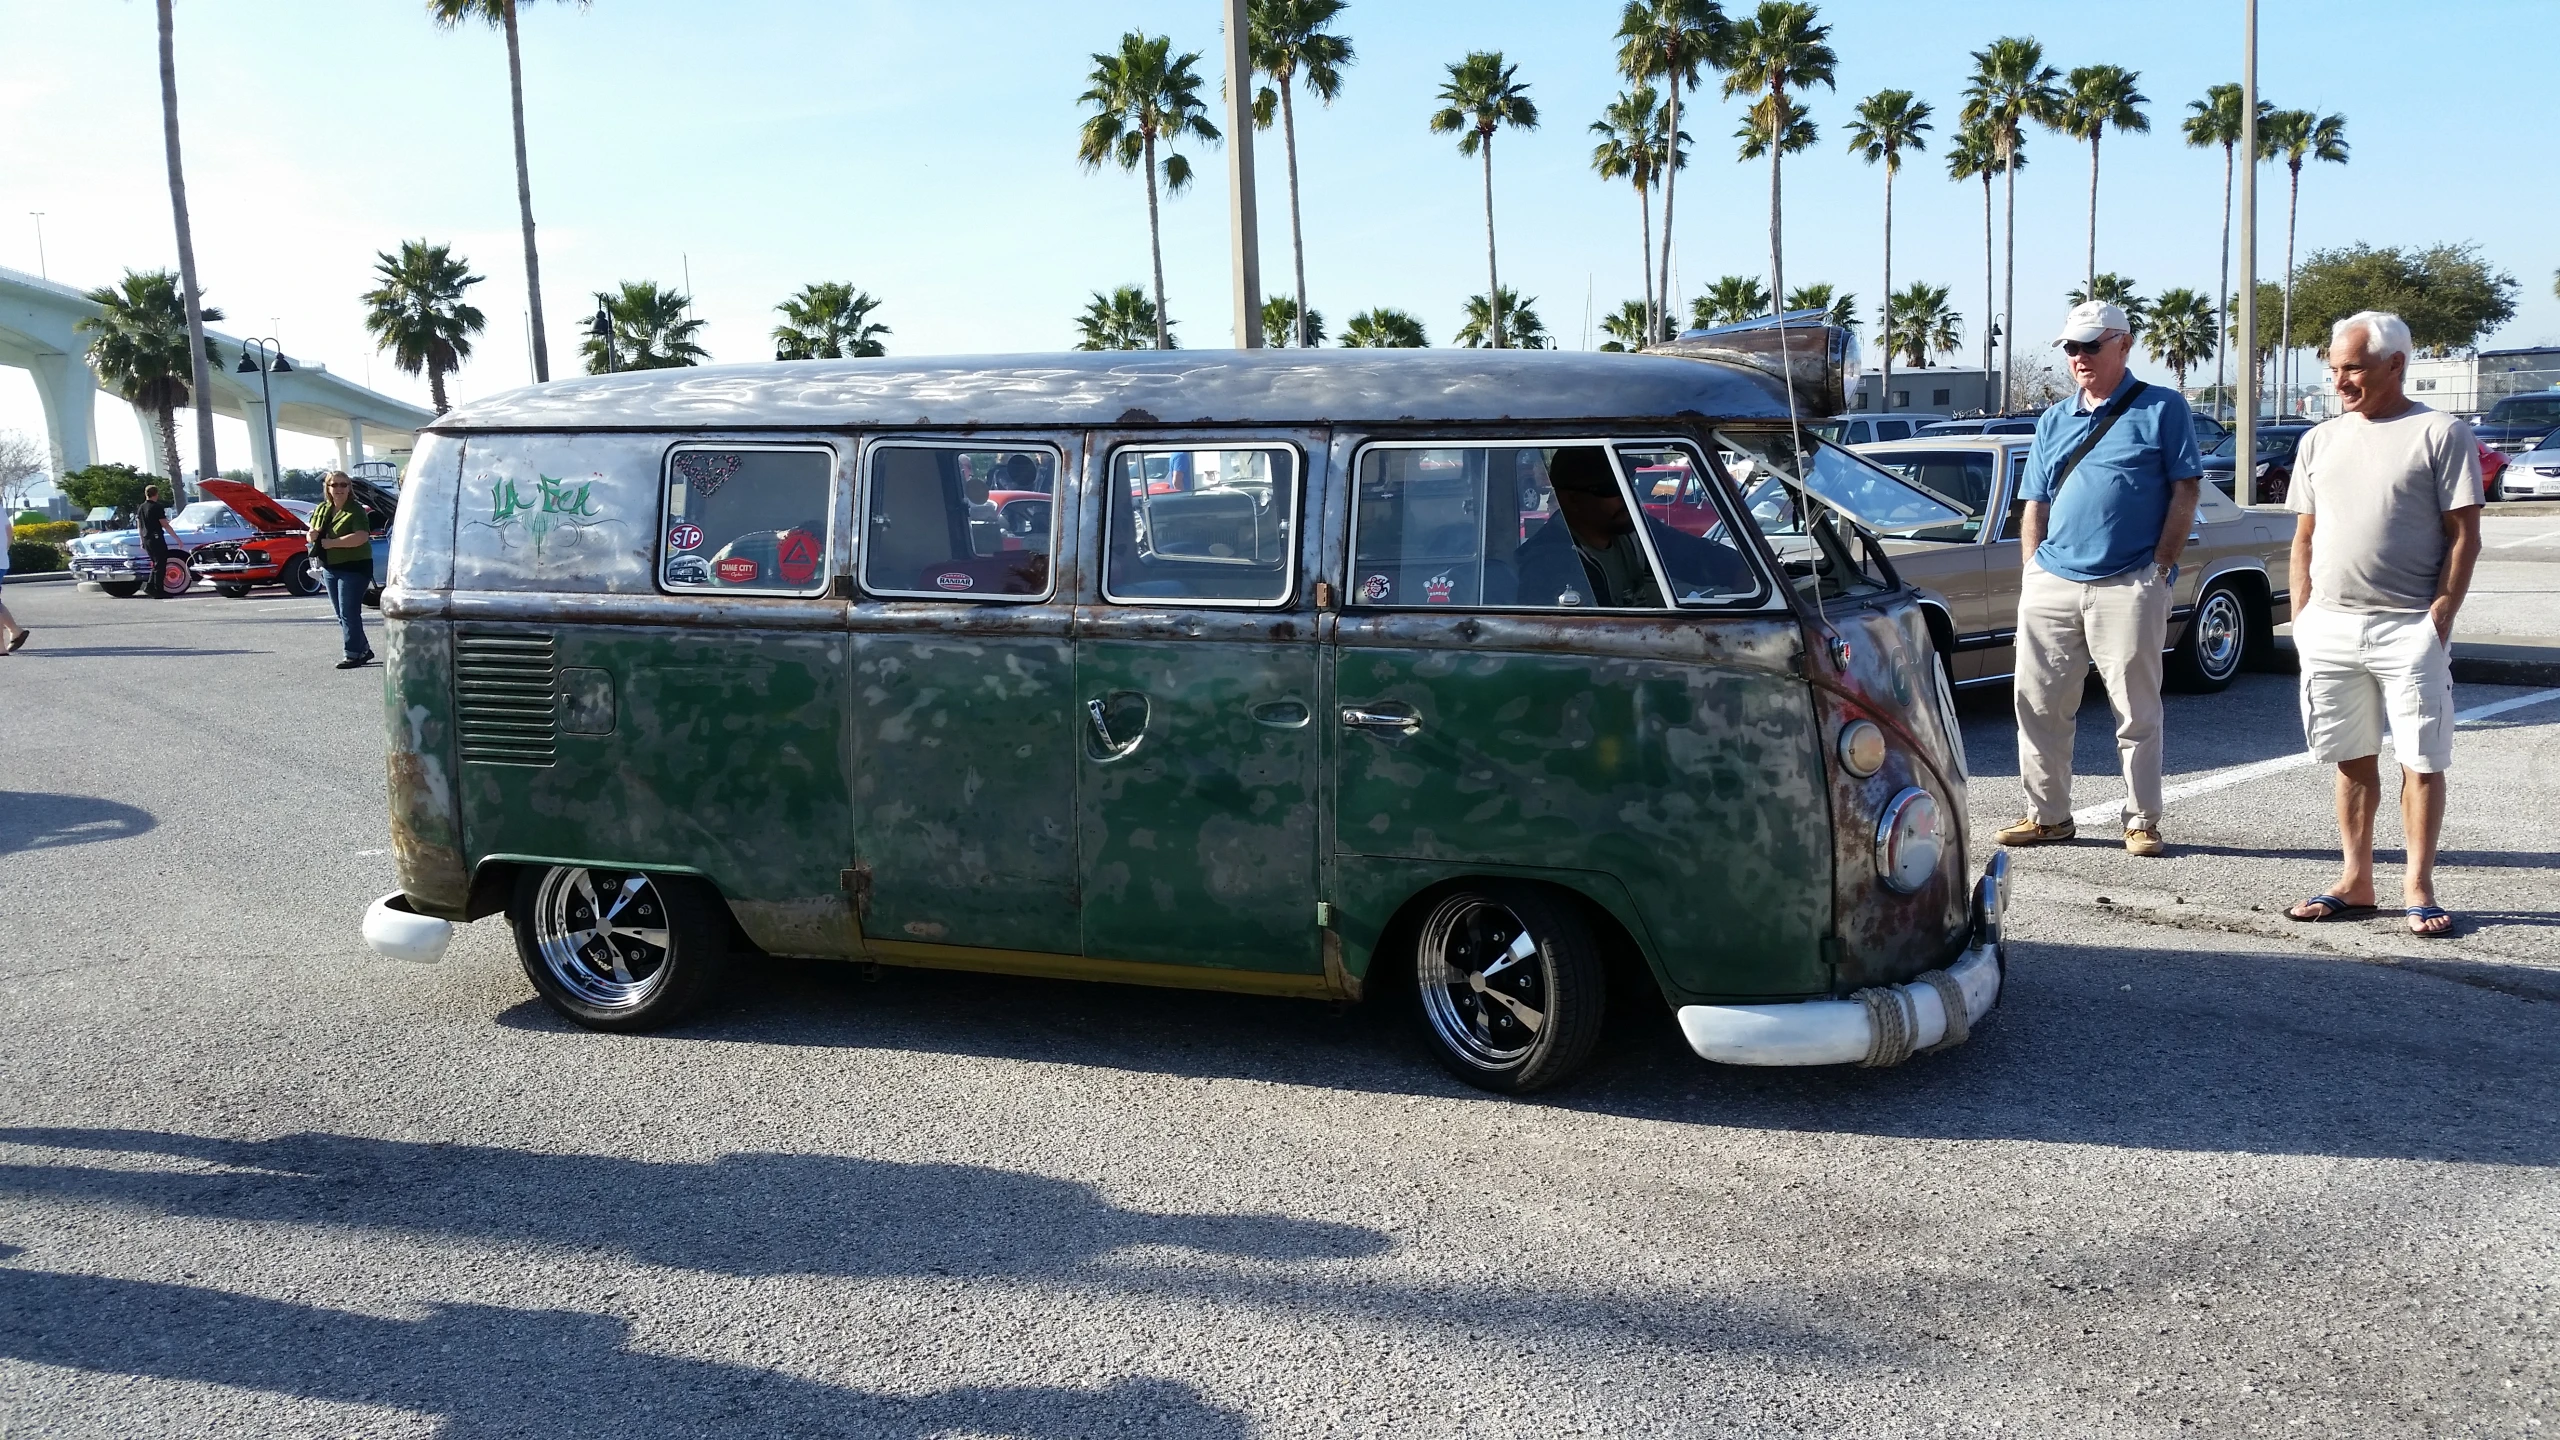 an old camper van in a parking lot with others around